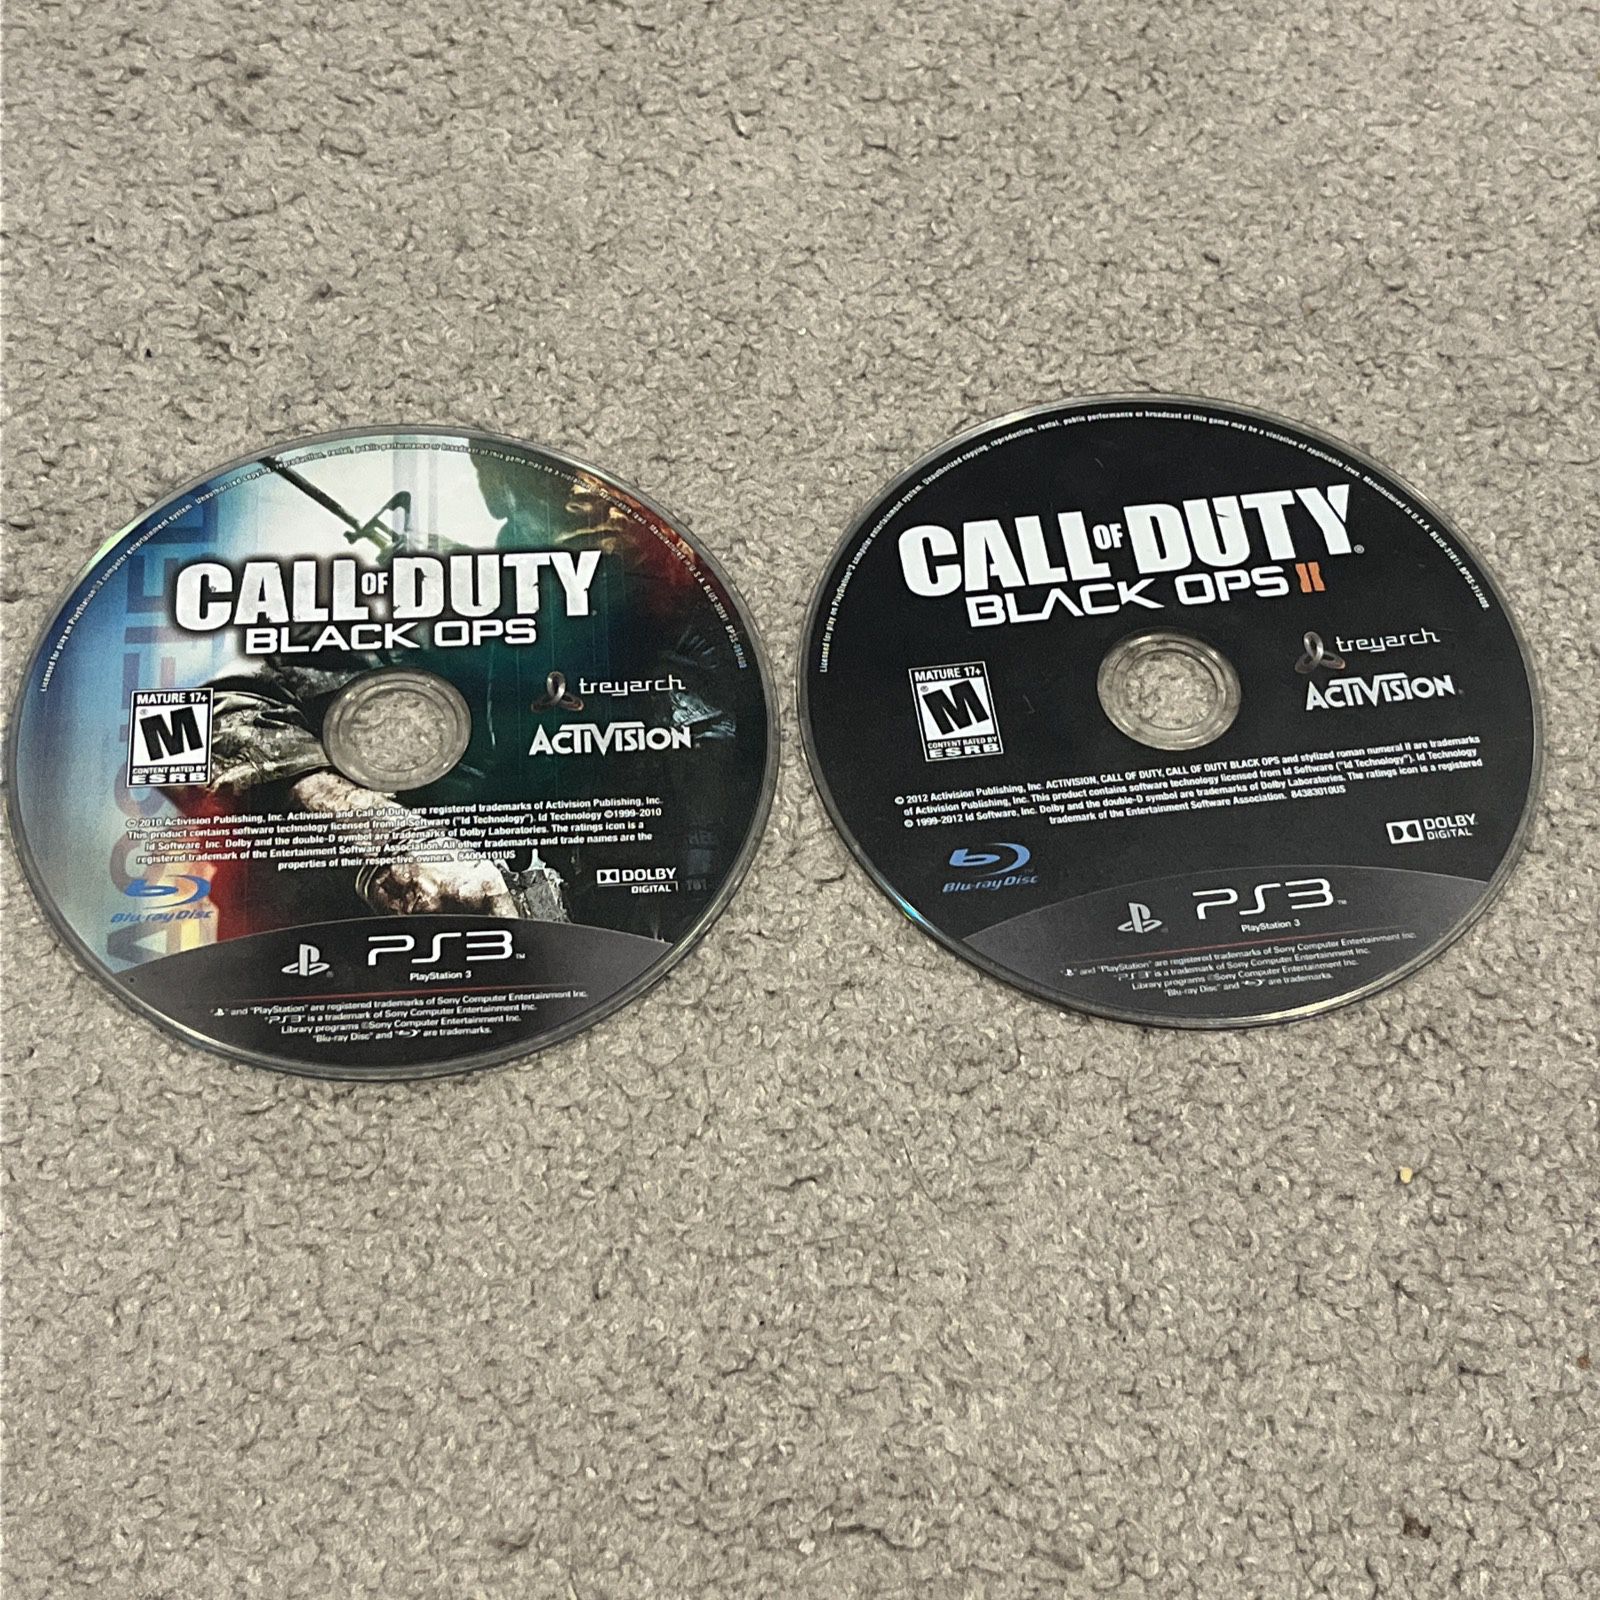 CALL OF DUTY COD BLACK OPS 1 & 2 Discs Only Playstation 3 PS3 Tested